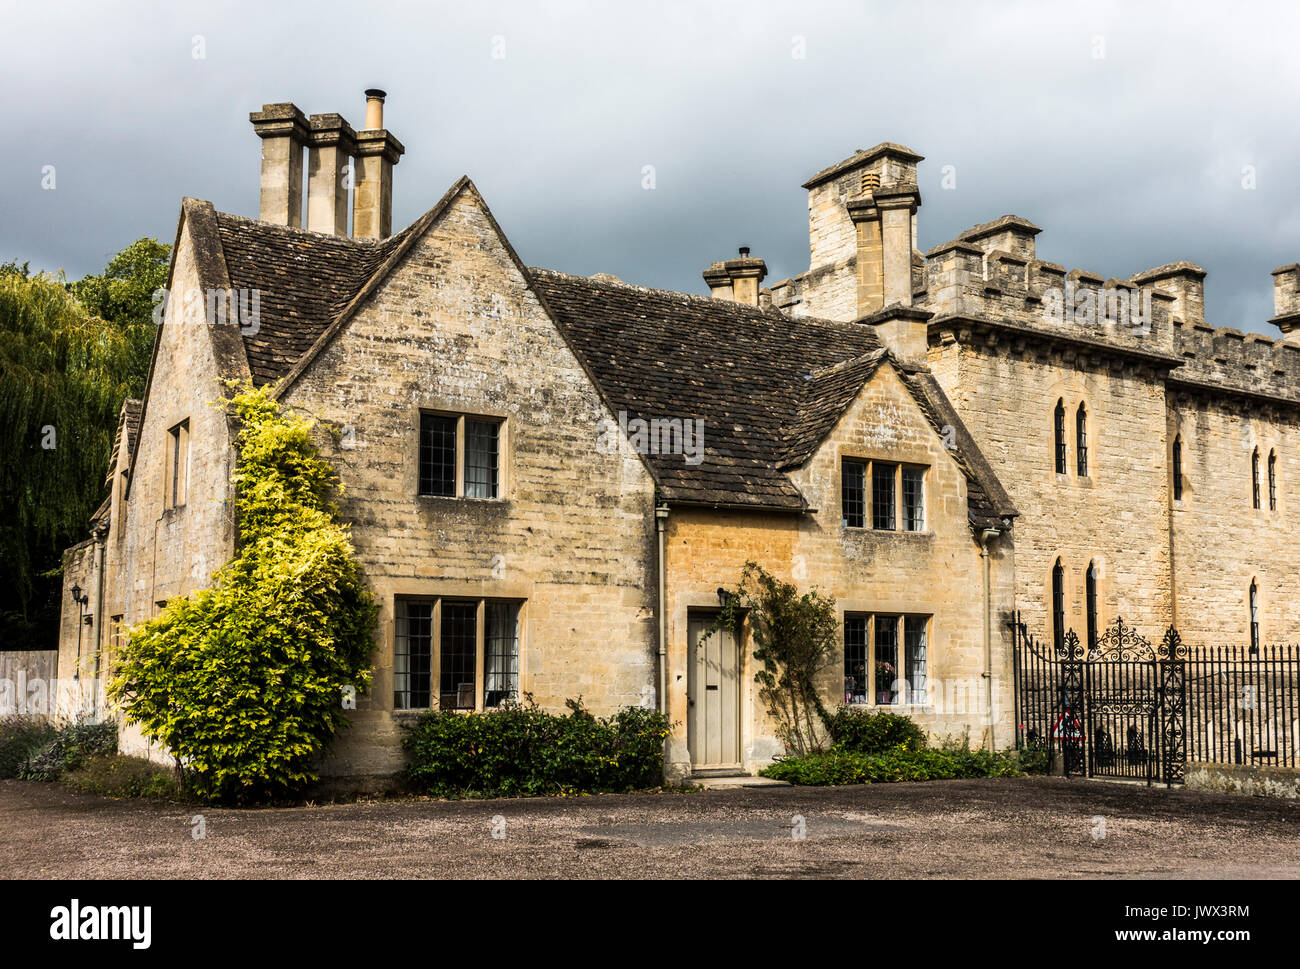 End house, next to park. Cecily Hill (street renowned for its collection of beautiful period property), Cirencester, Gloucestershire, England, UK. Stock Photo